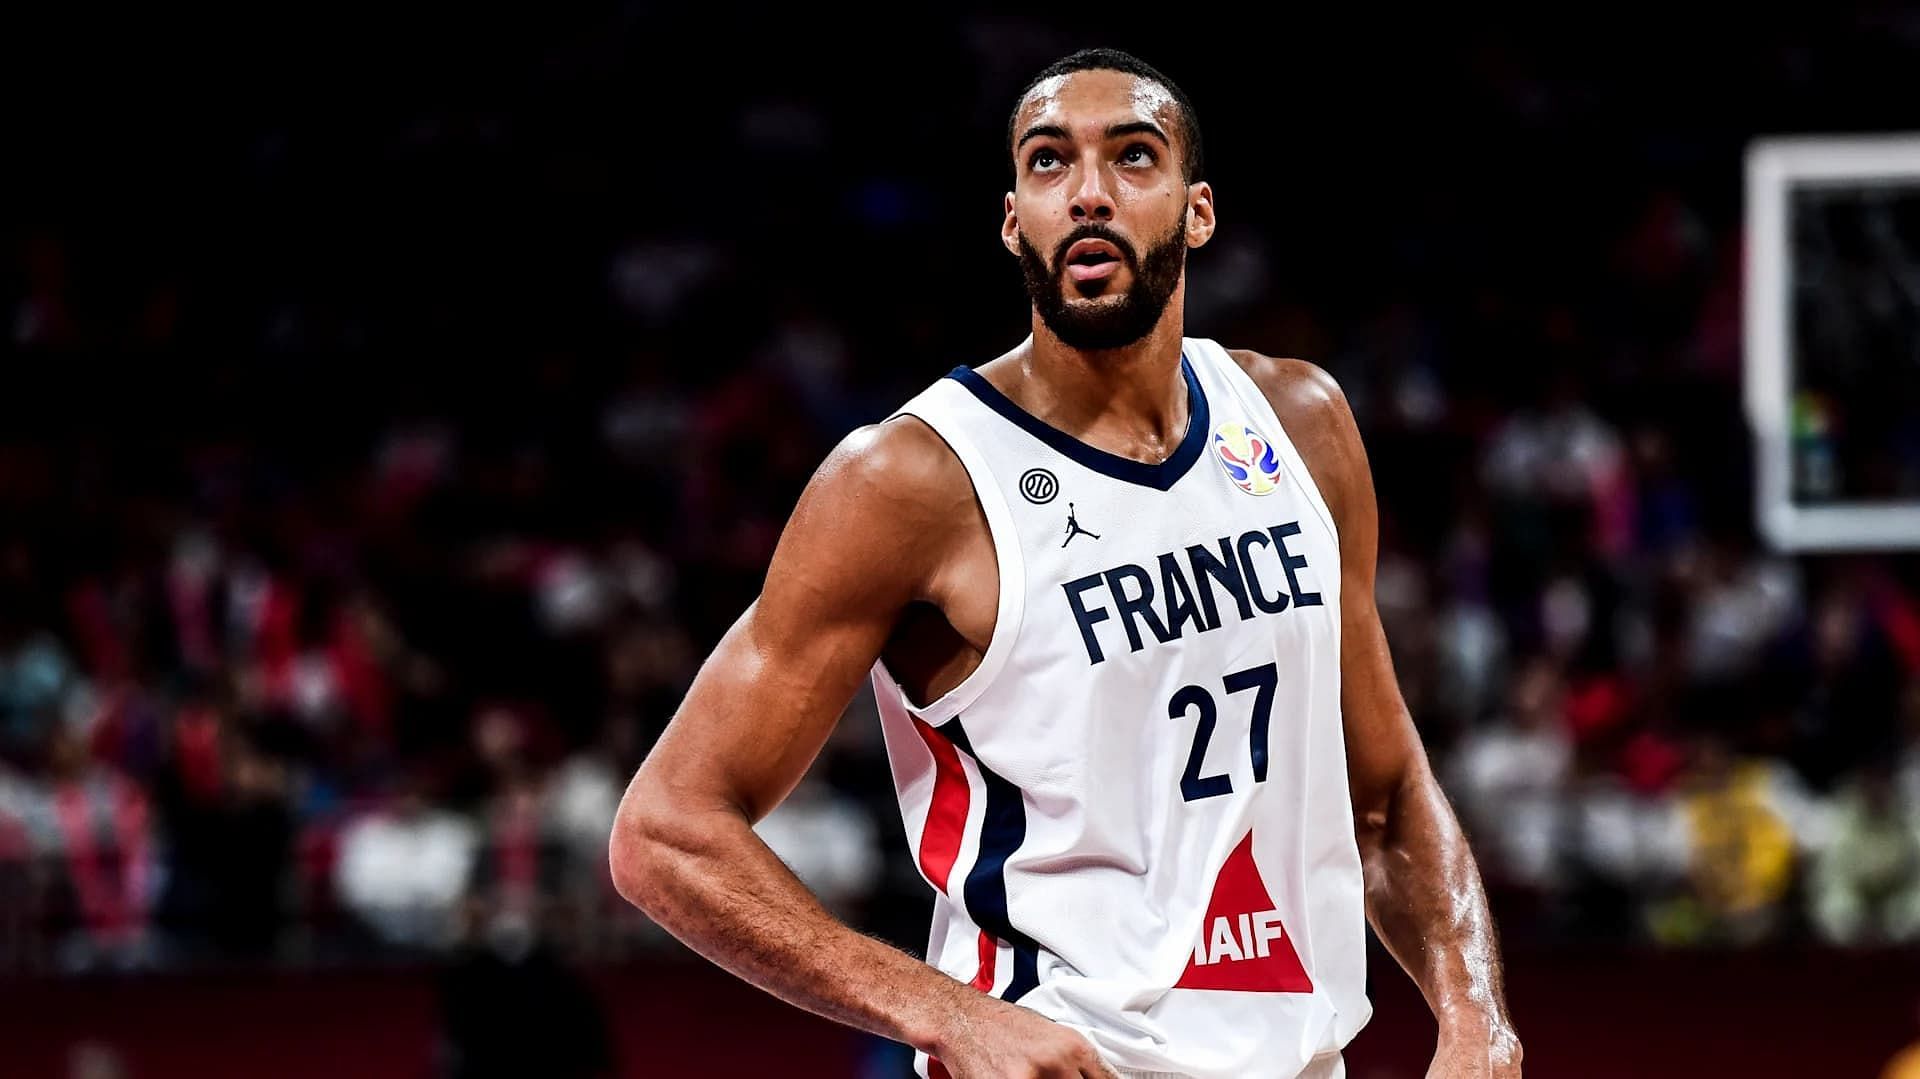 Rudy Gobert had a lackluster performance against both Canada and Latvia